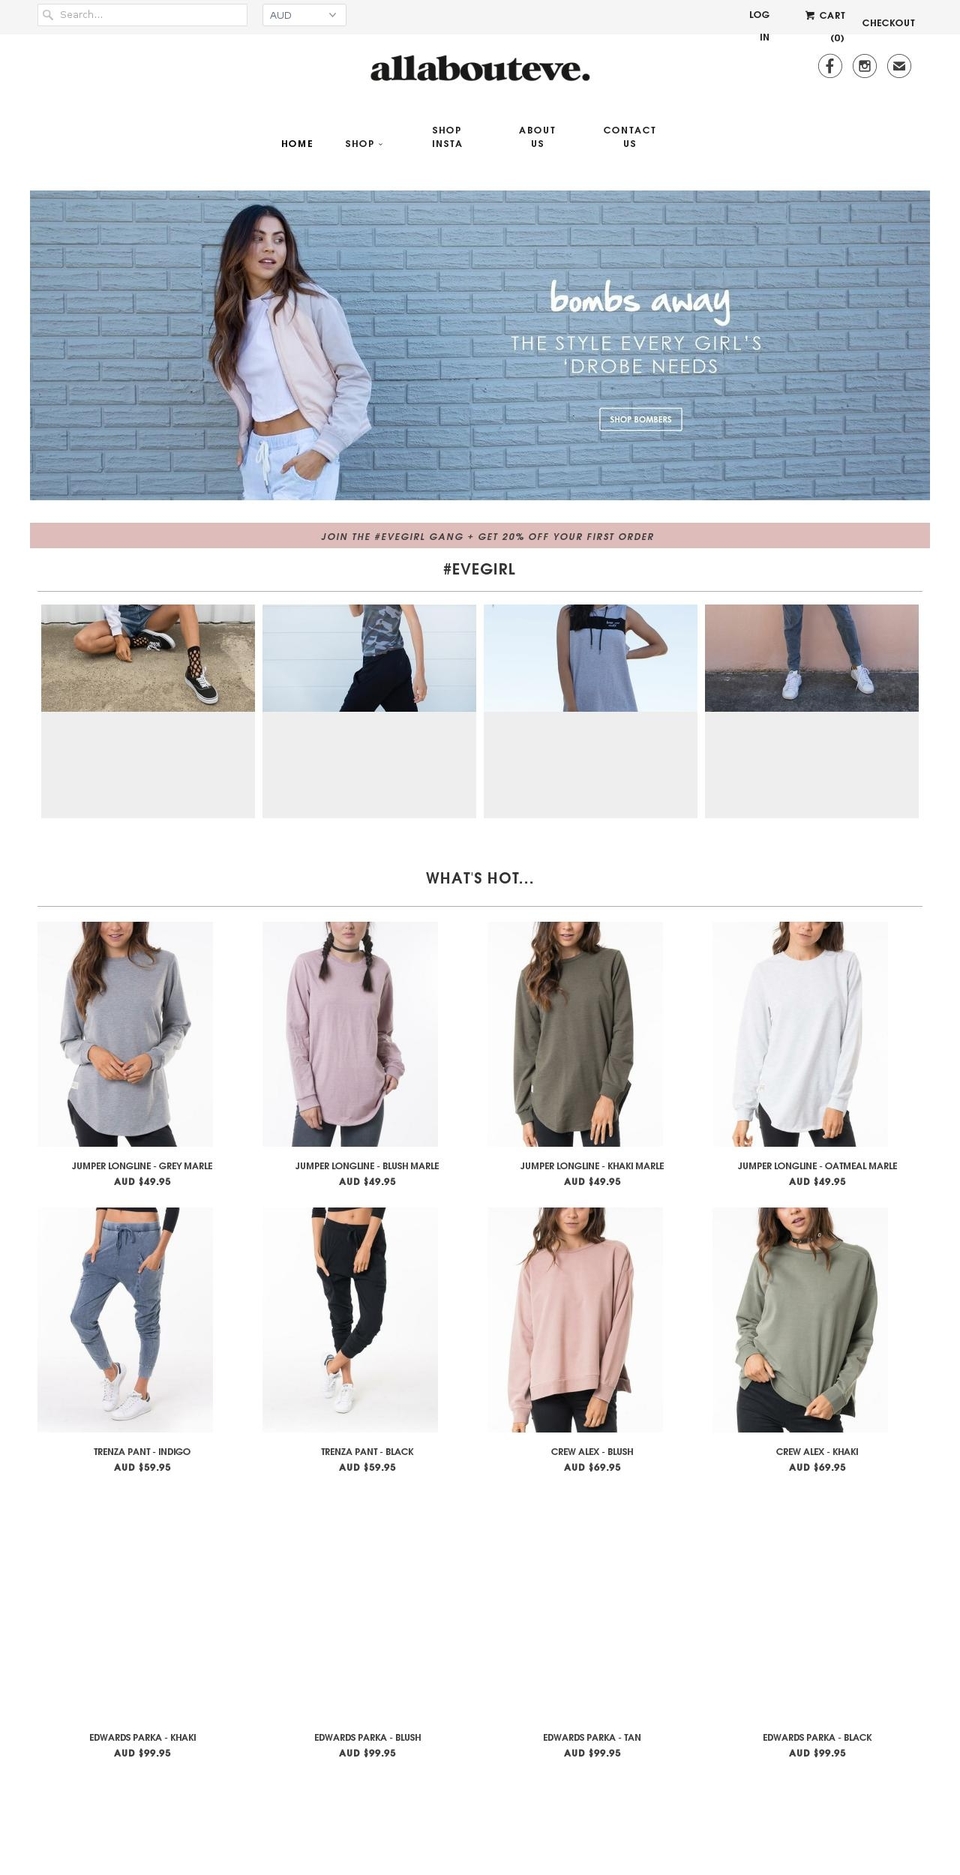 August Shopify theme site example allabouteveclothing.com